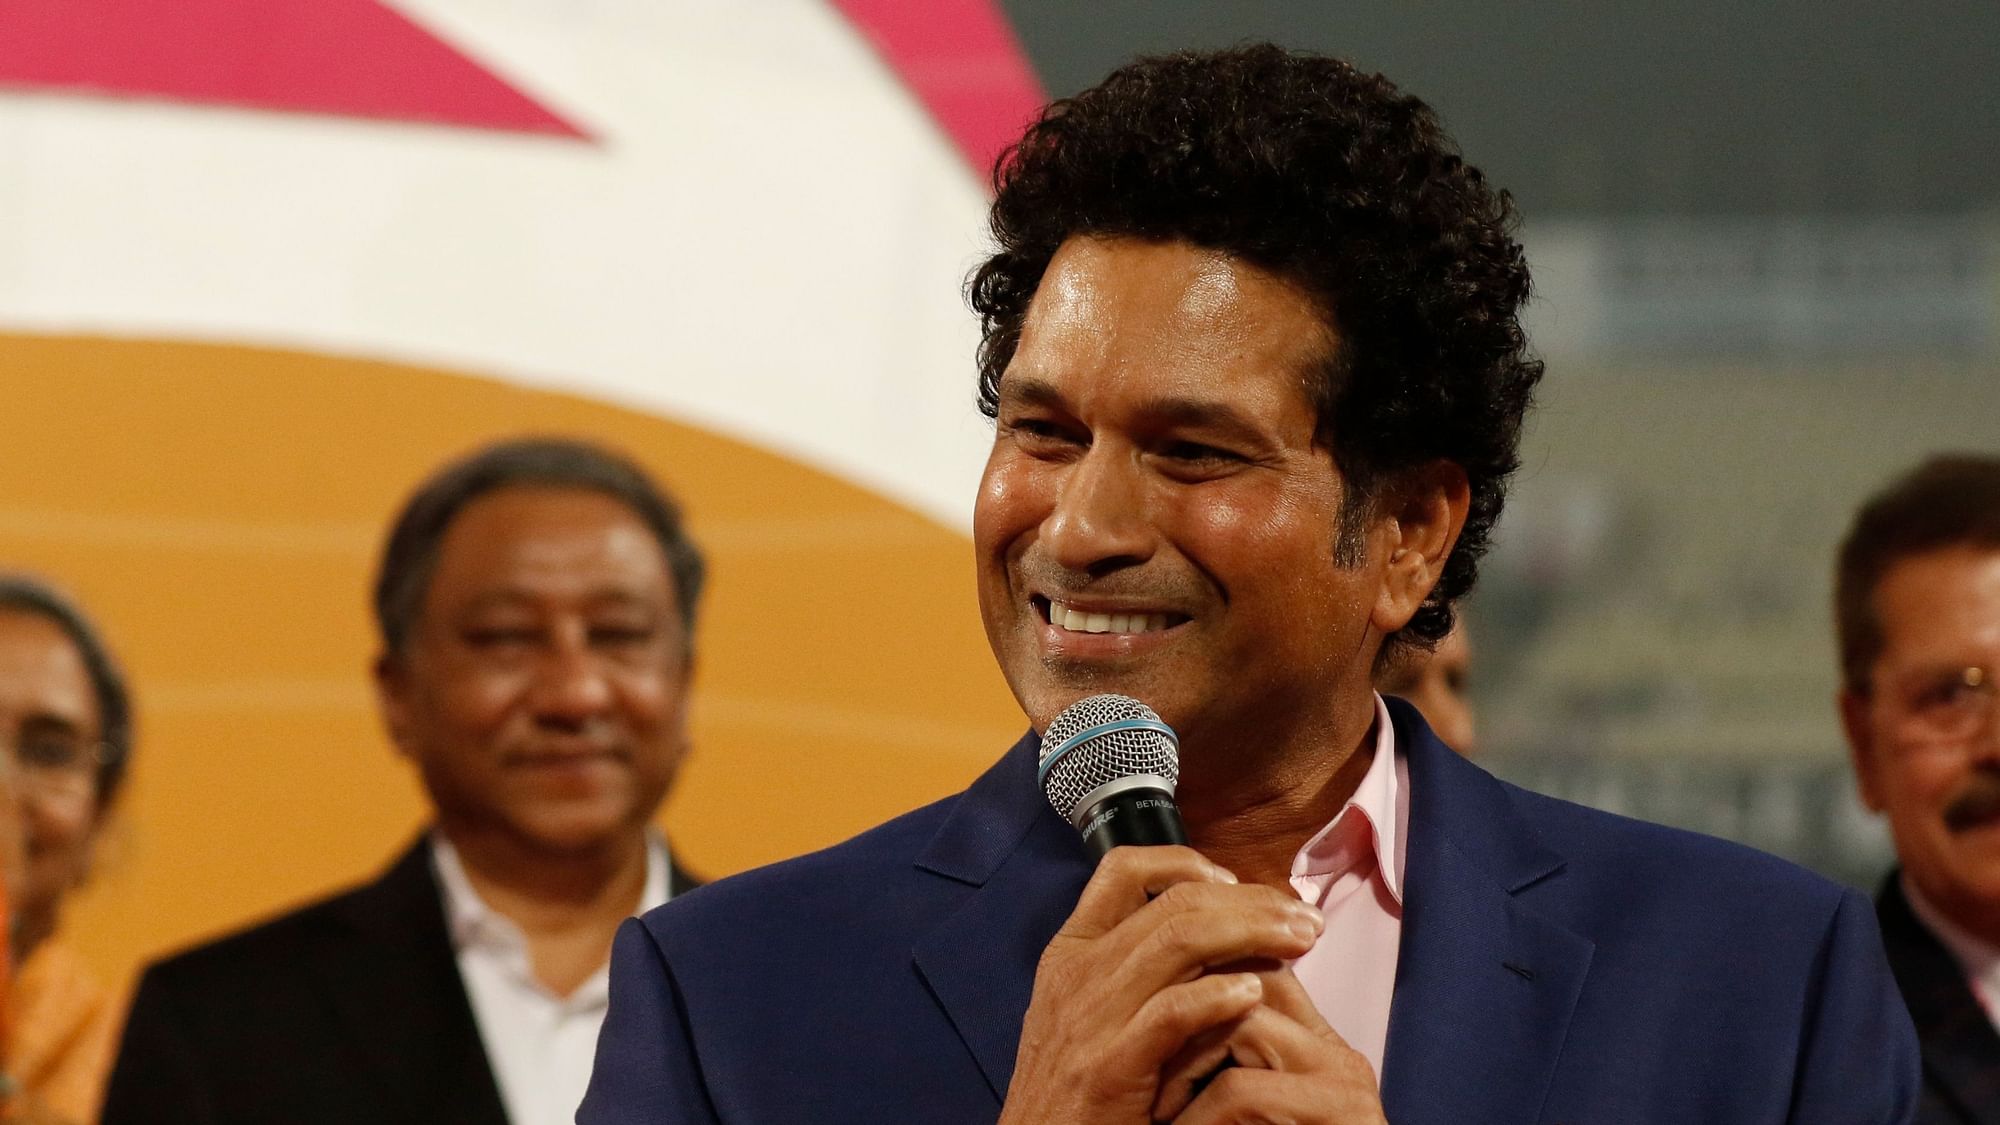 The pitches in New Zealand have become a lot more batting-friendly over the years, says iconic former batsman Sachin Tendulkar.